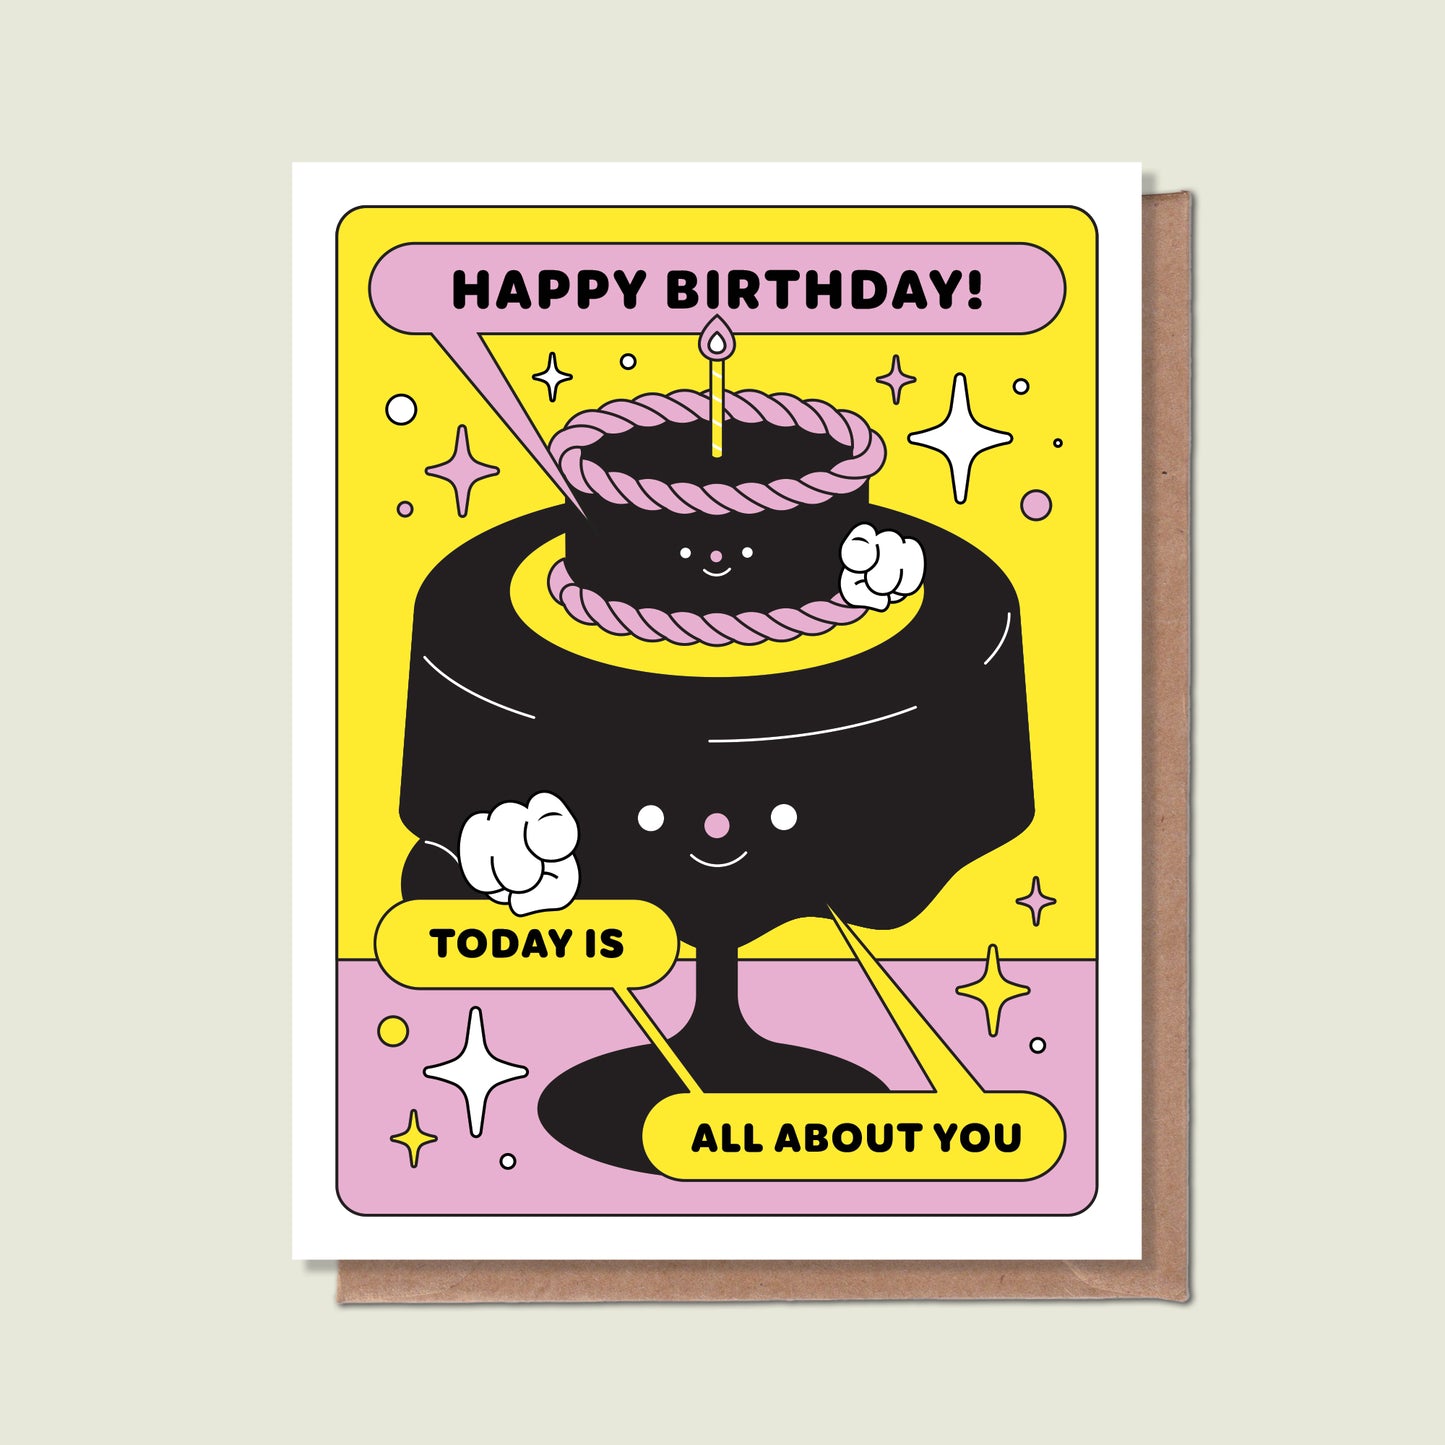 Happy Birthday, Today Is All About You Greeting Card